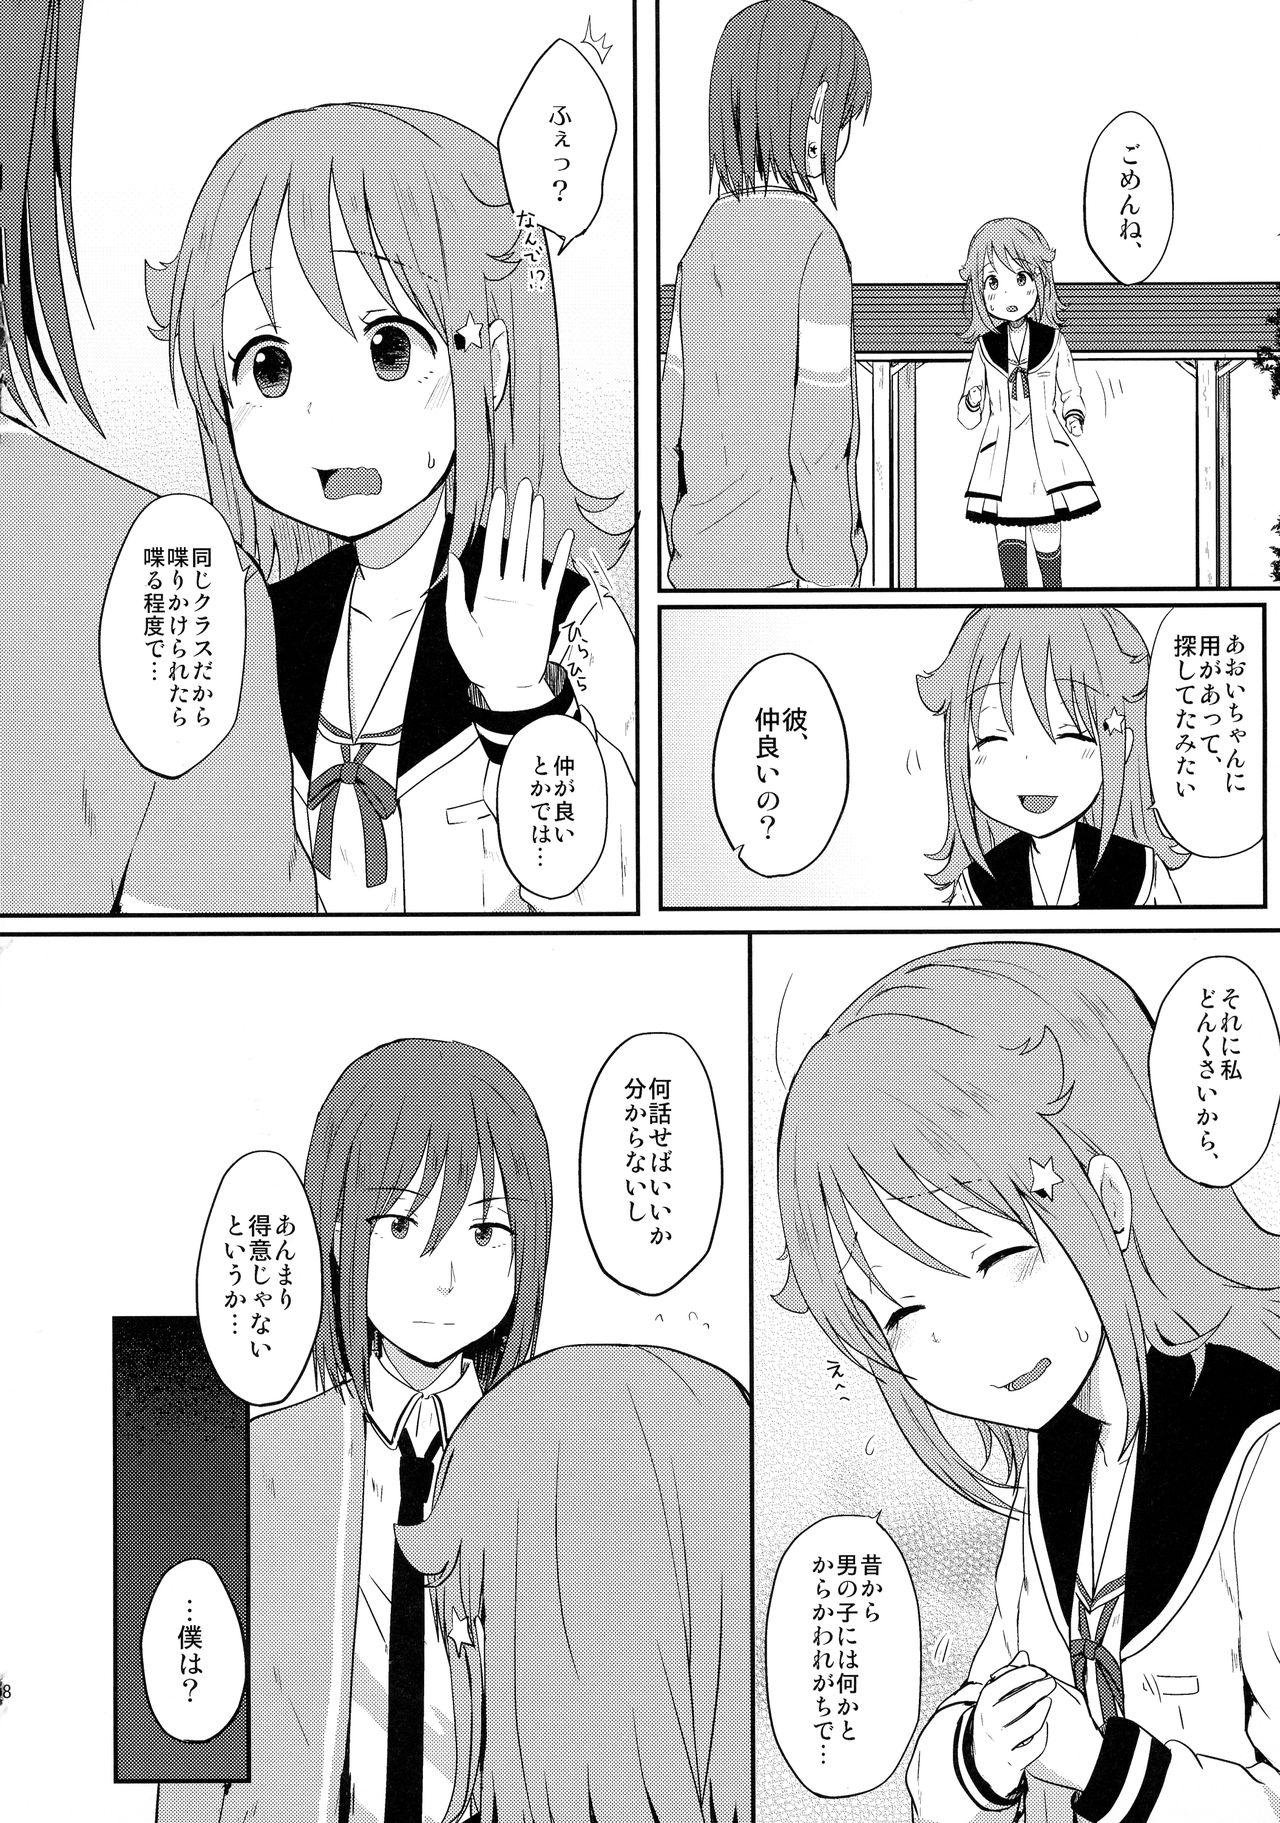 Older Nowhere land 2 - Houkago no pleiades Face Sitting - Page 8